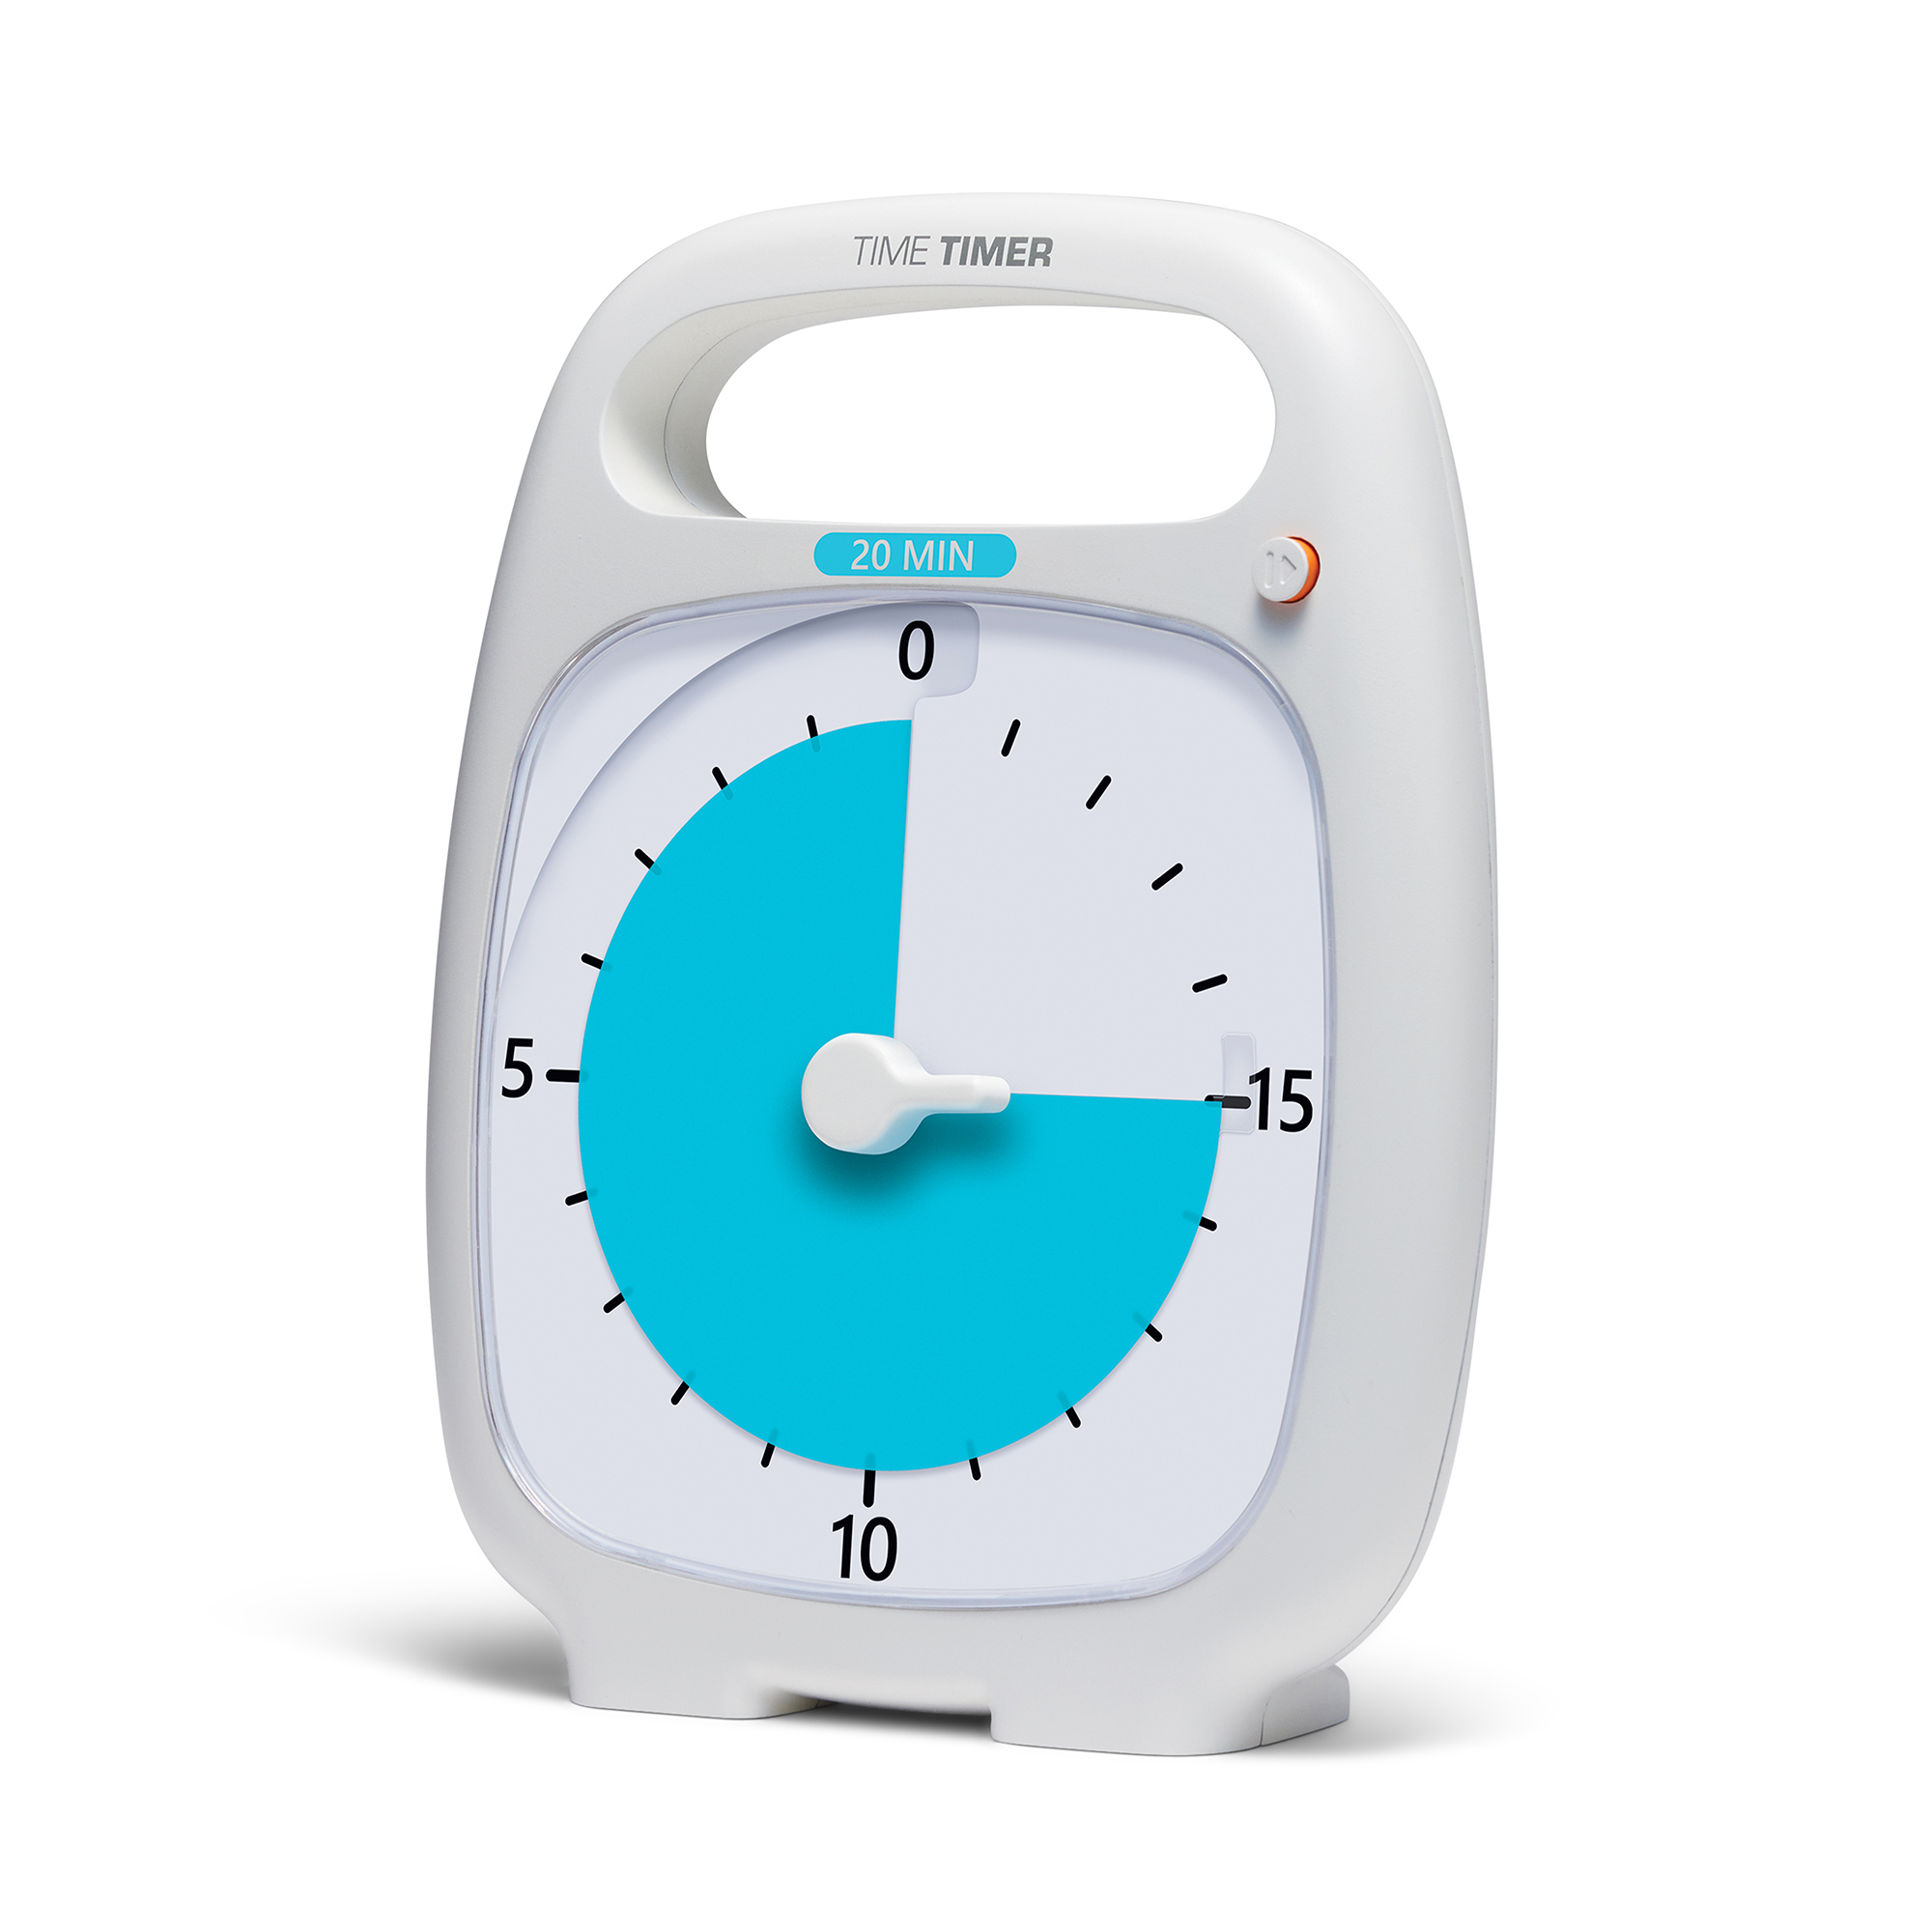 The Time Timer PLUS 20-minute visual timer is shown. The bright blue disk is set at 15 minutes. The Pause Button is popped out showing an orange ring around it.